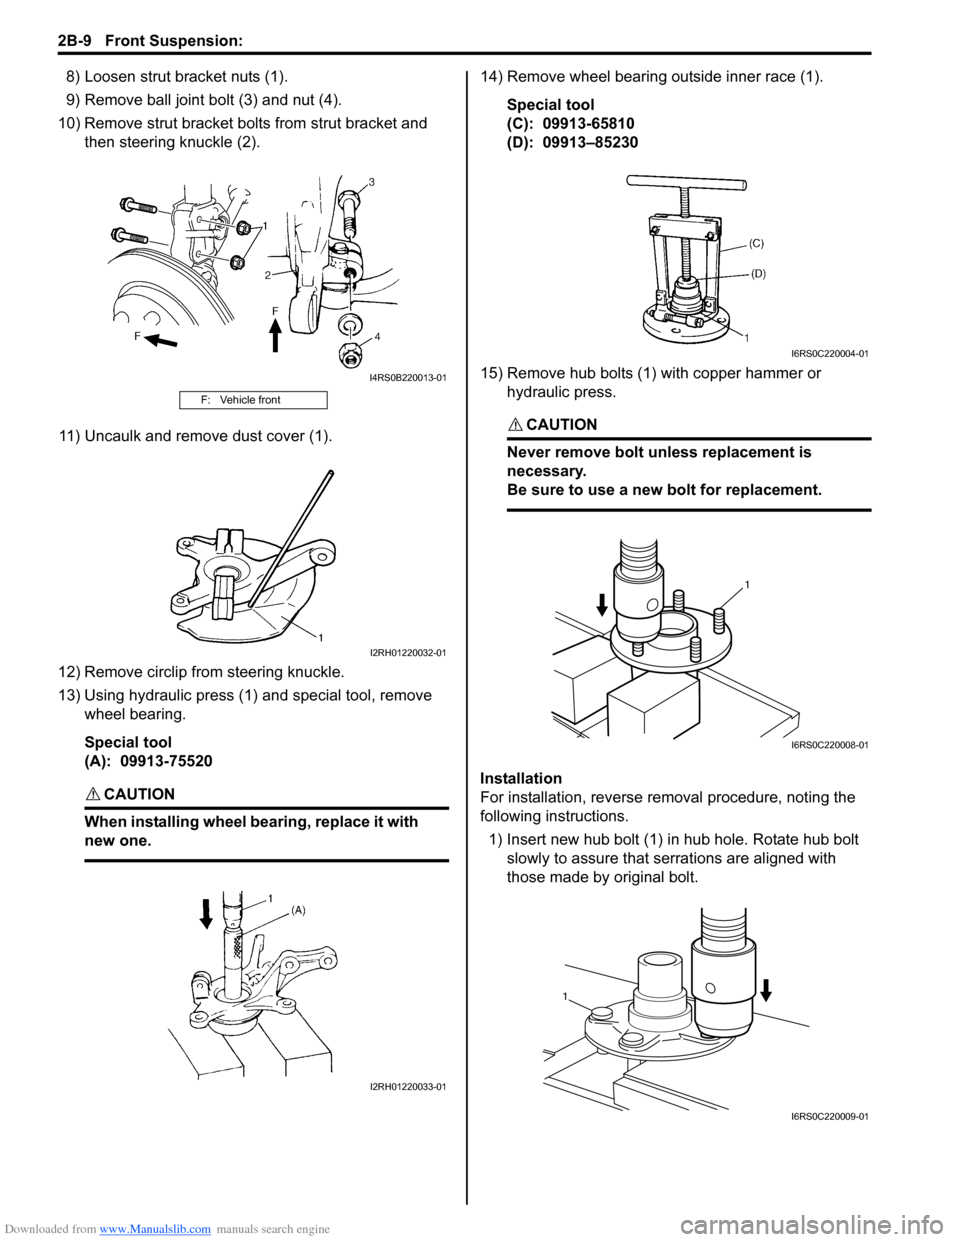 SUZUKI SWIFT 2007 2.G Service Workshop Manual Downloaded from www.Manualslib.com manuals search engine 2B-9 Front Suspension: 
8) Loosen strut bracket nuts (1).
9) Remove ball joint bolt (3) and nut (4).
10) Remove strut bracket bolt s from strut